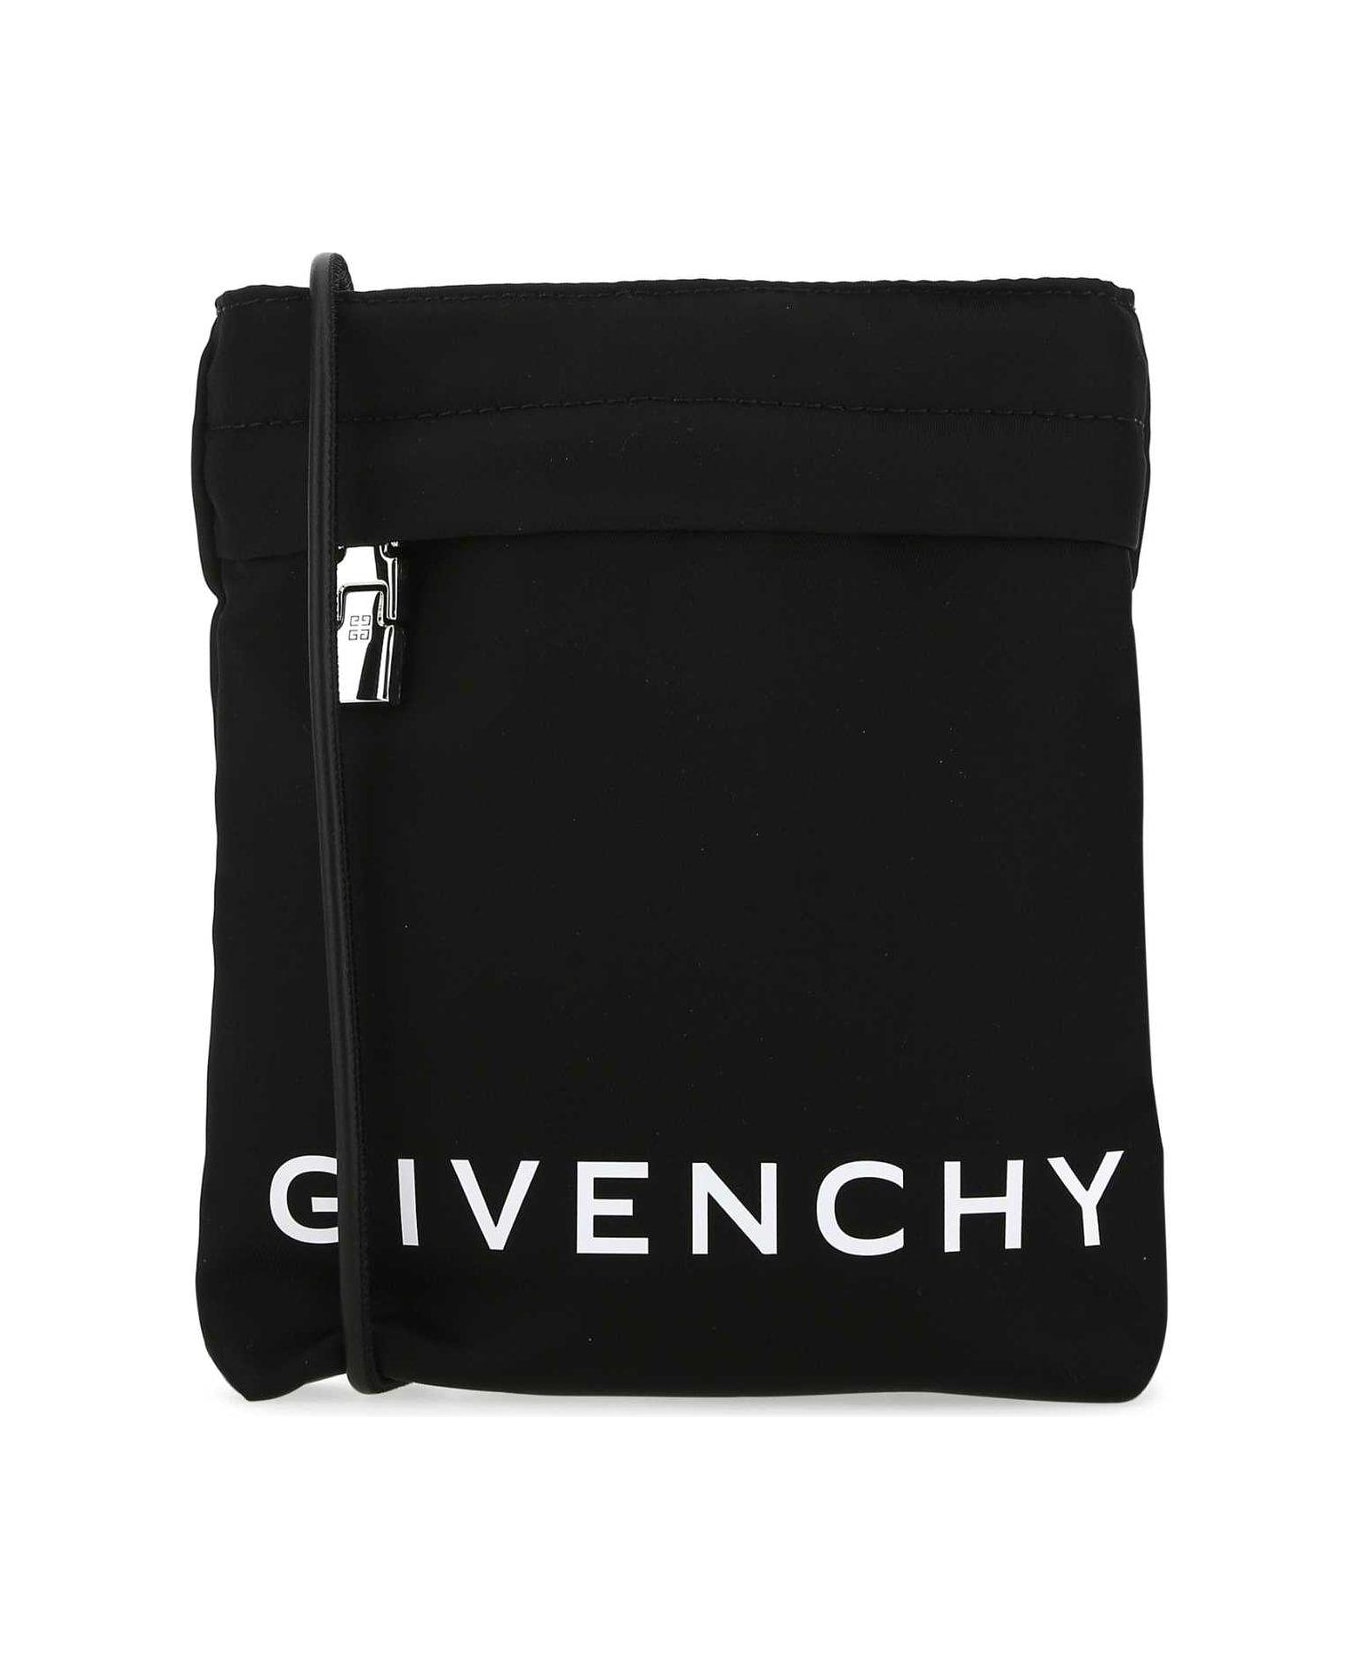 Givenchy Logo Printed Iphone Pouch - Black